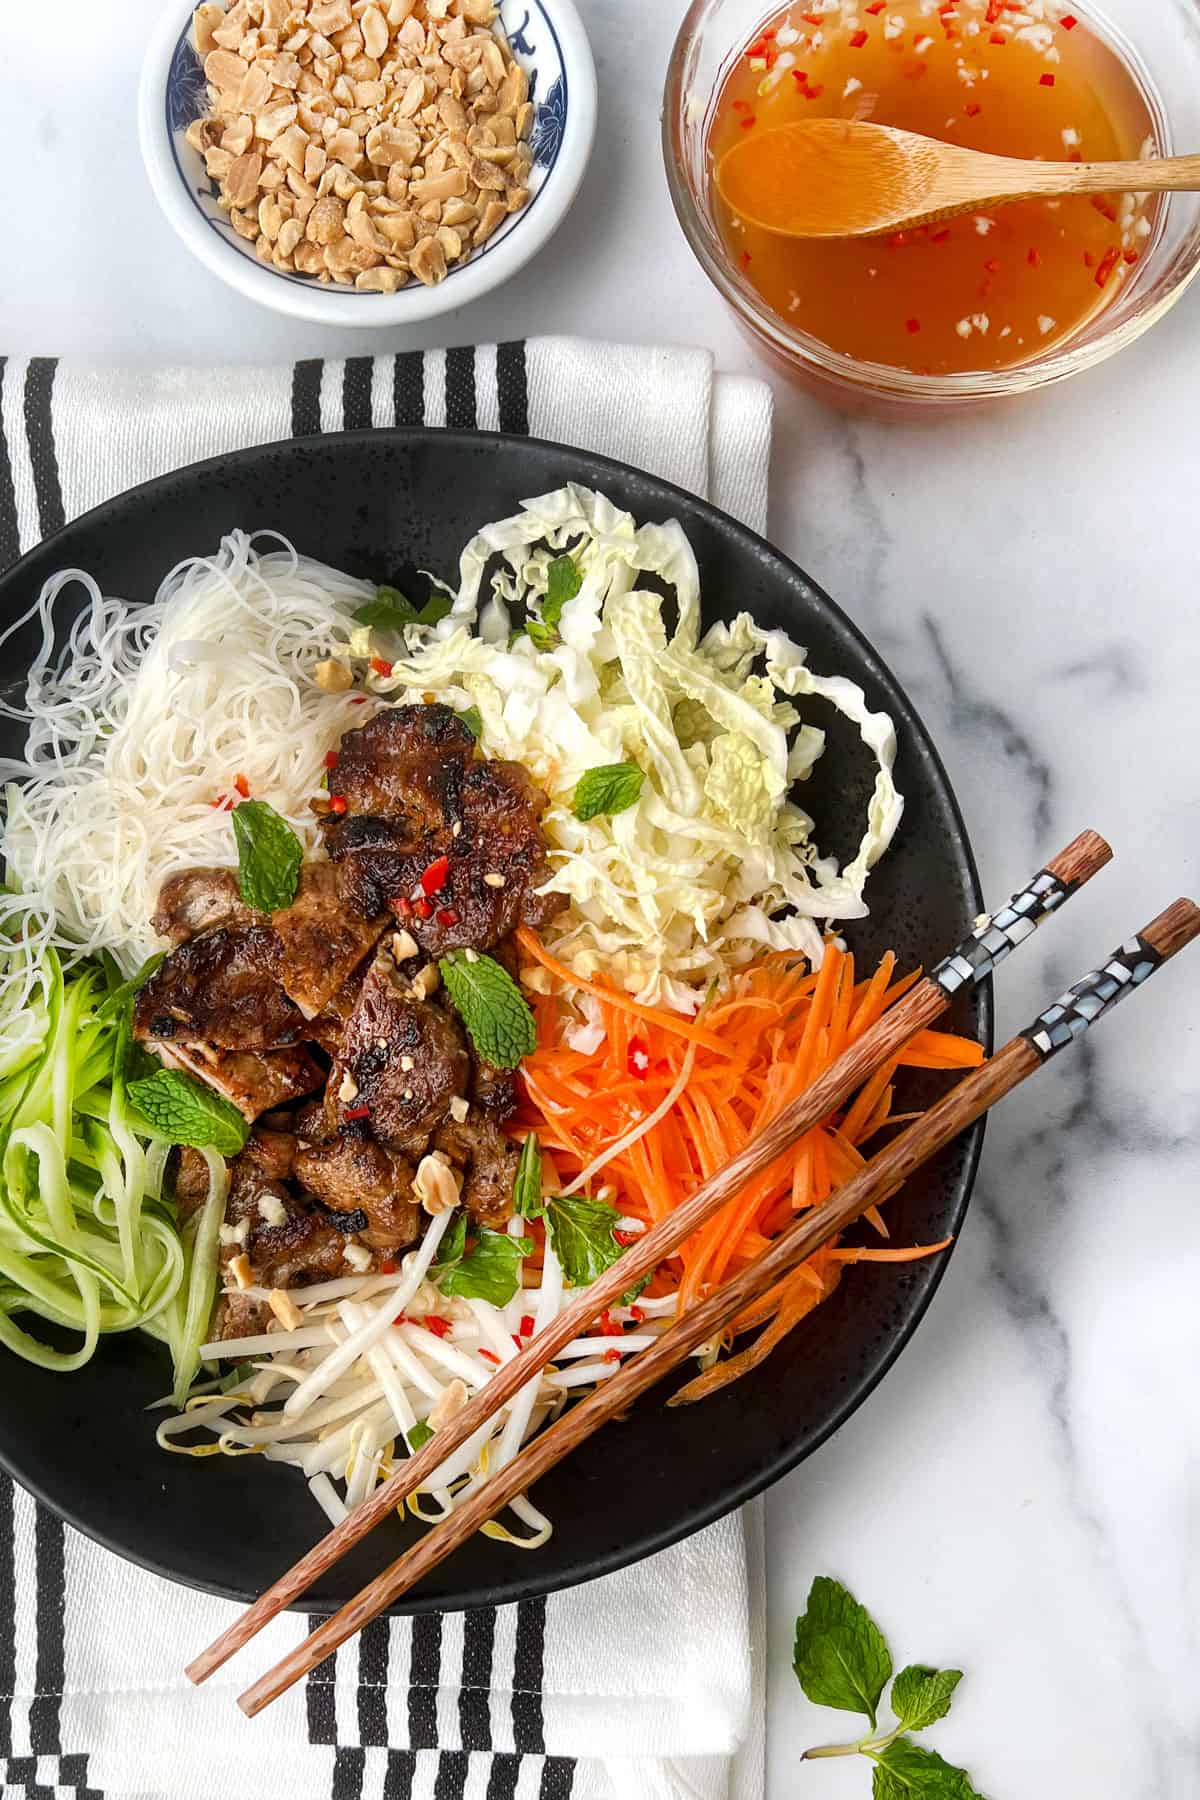 Vietnamese noodle salad bowl arranged with caramelized pork in the center and piles of shredded carrots, cucumbers and cabbage around it, along with a pile of vermicelli rice noodles and bean sprouts.